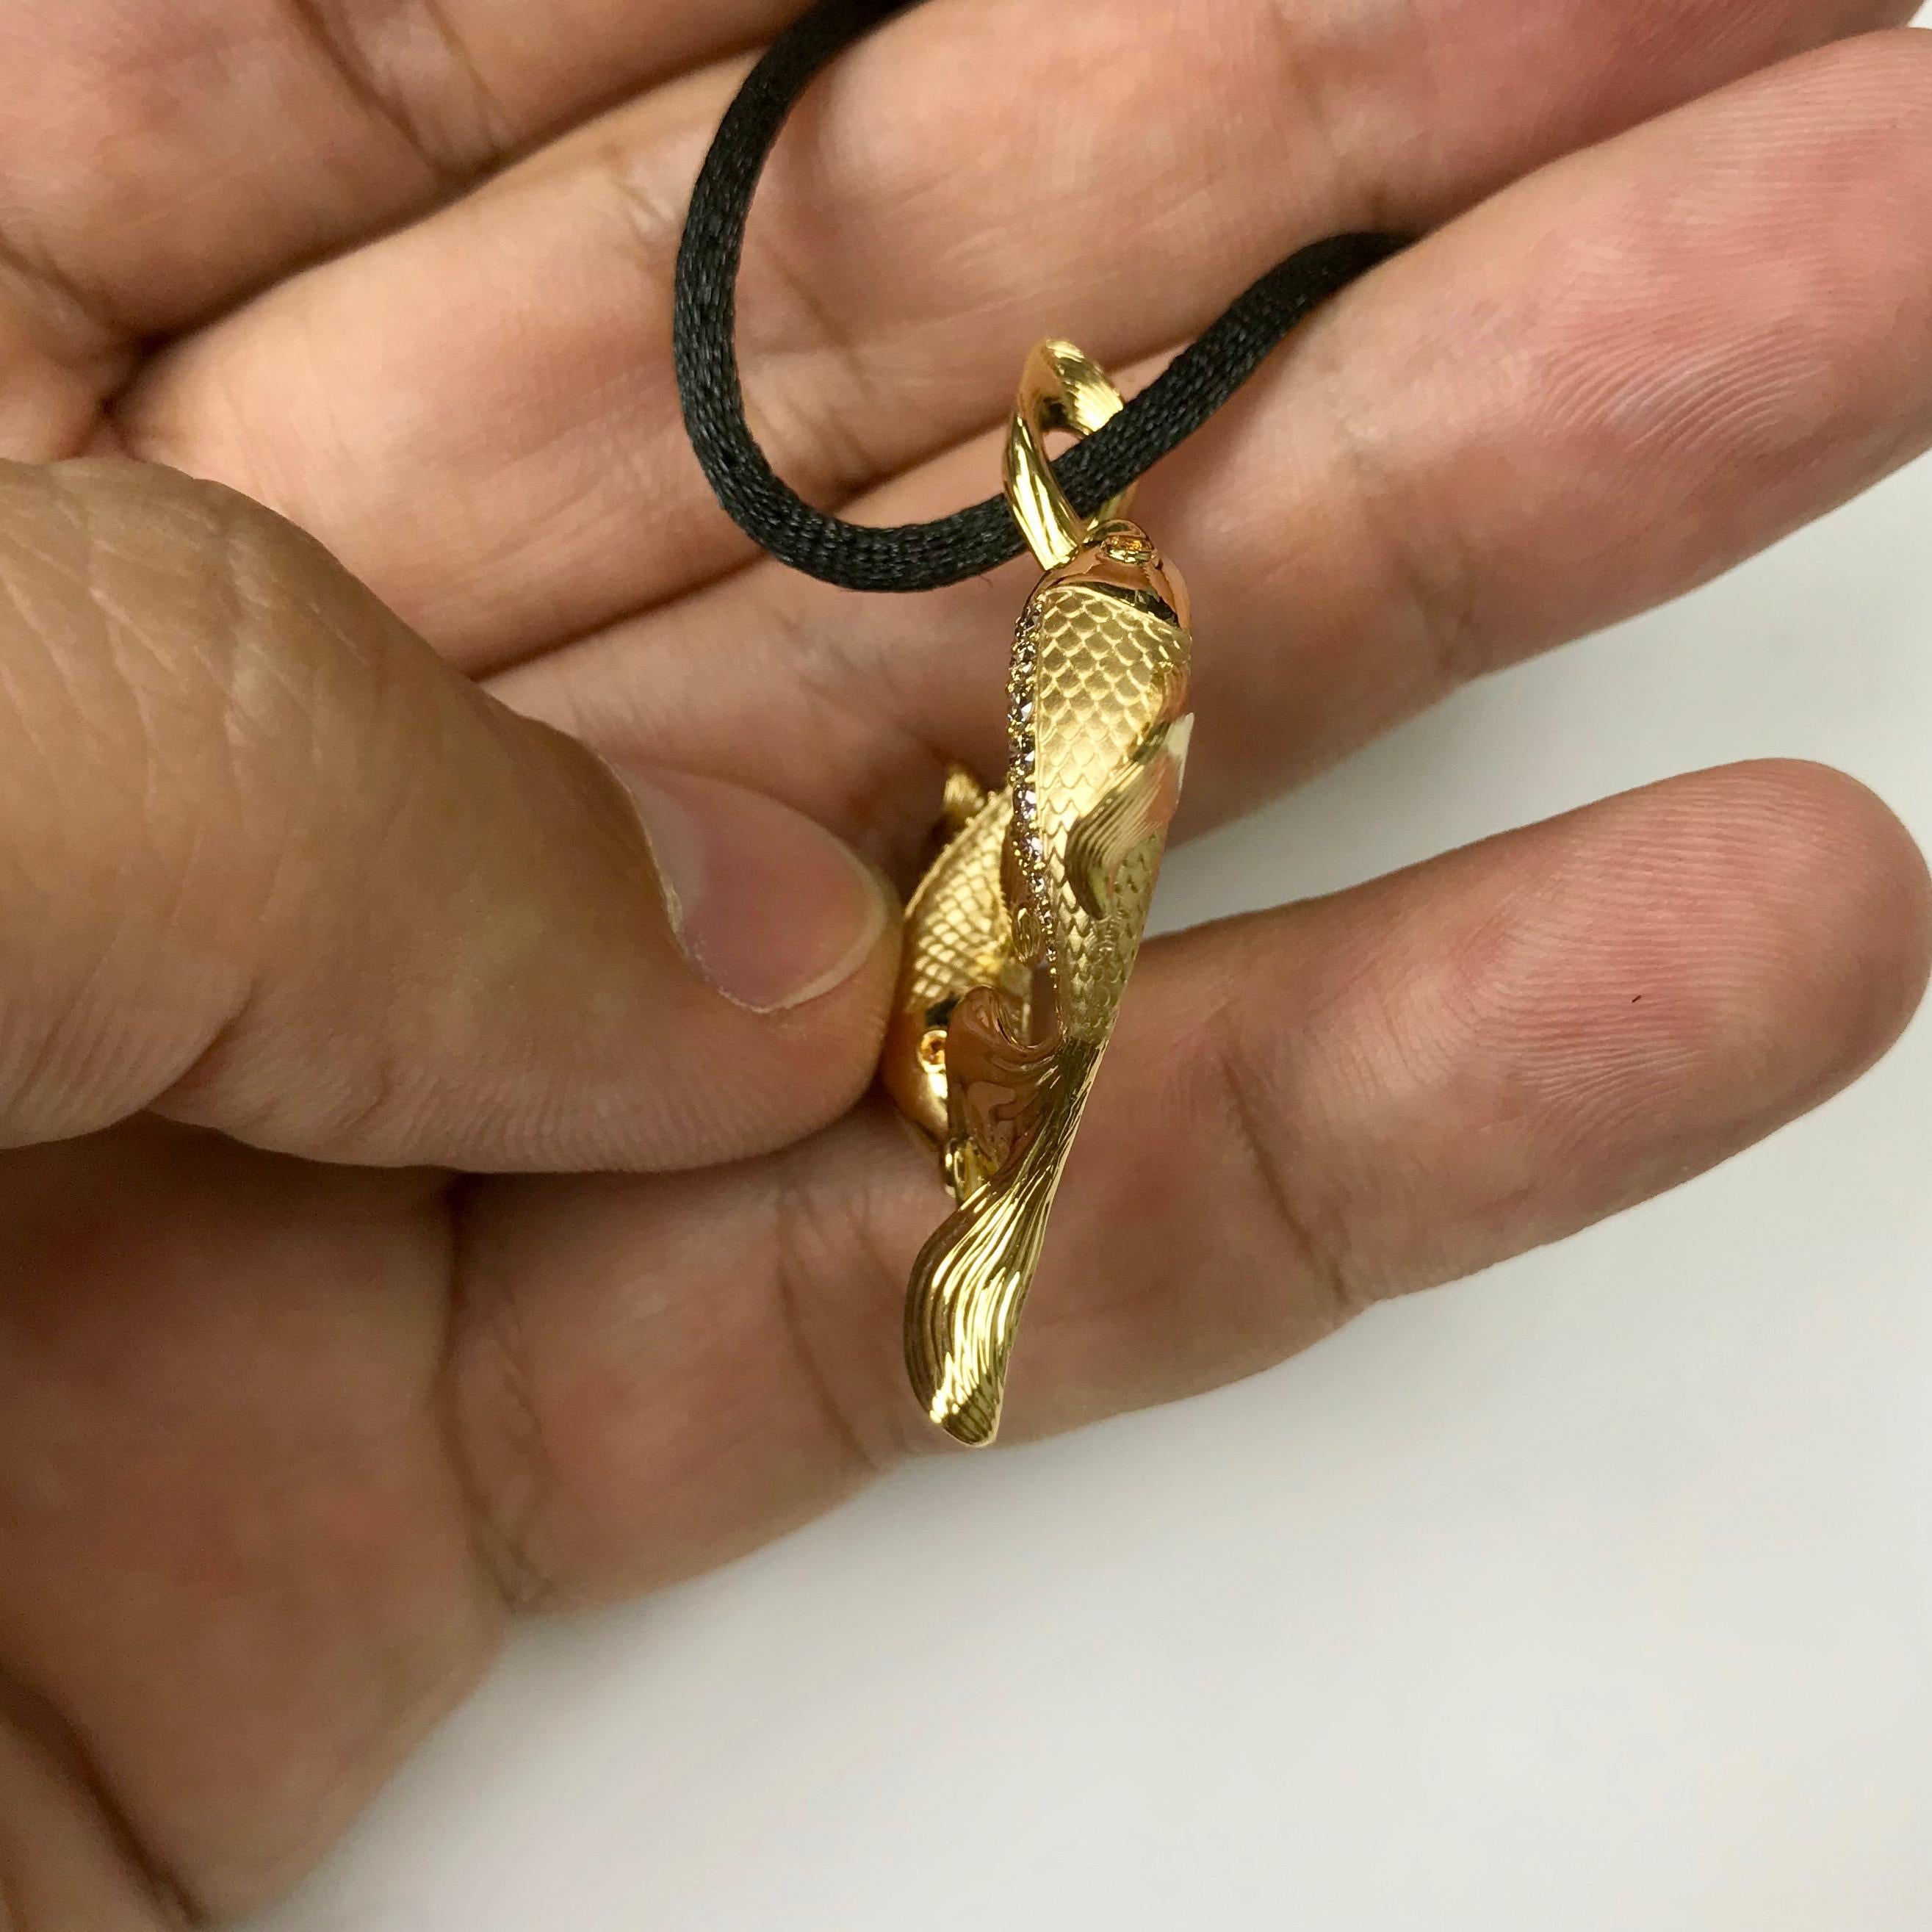 2 fish necklace